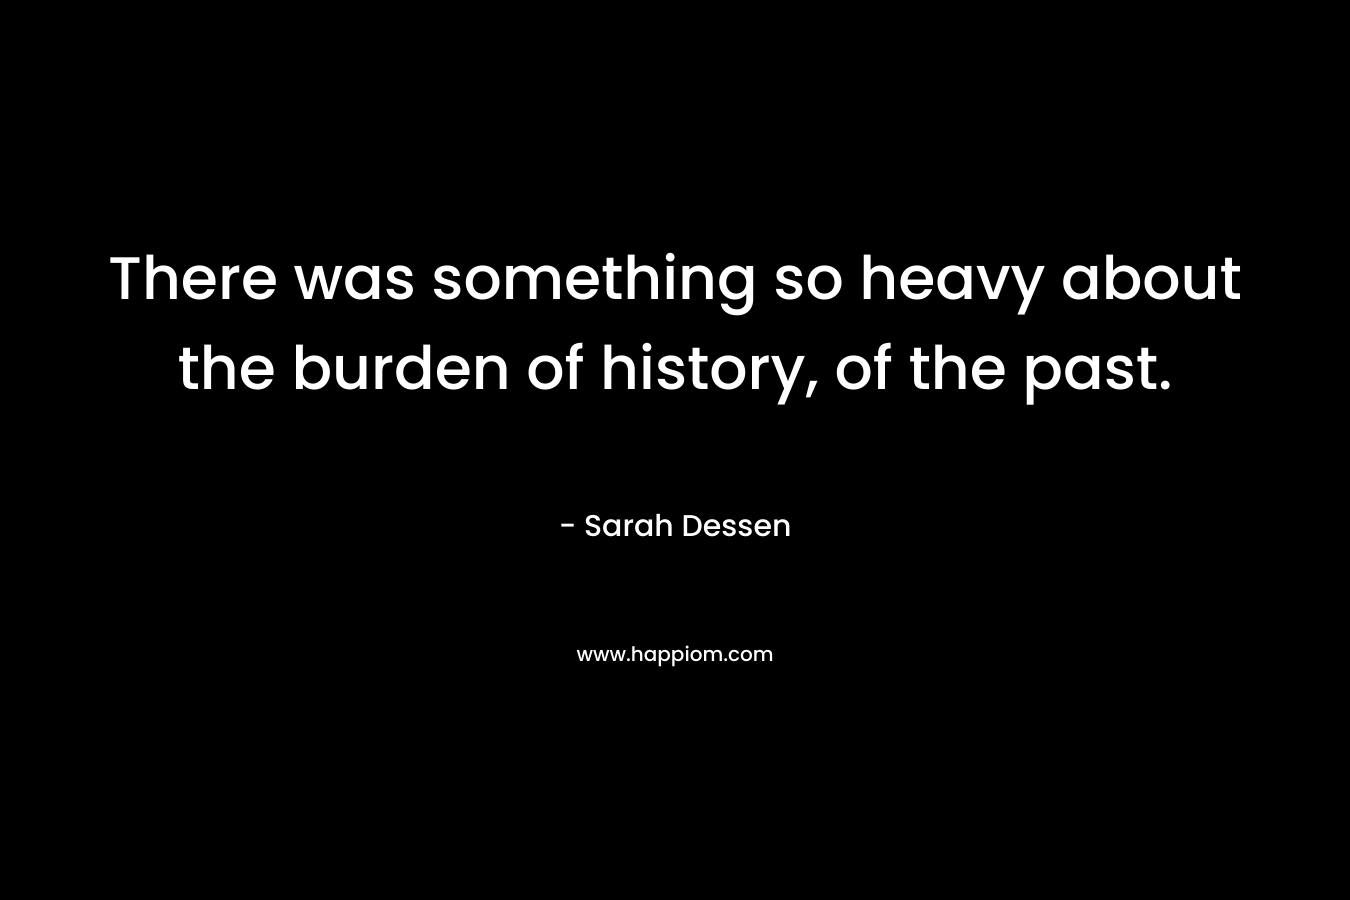 There was something so heavy about the burden of history, of the past.